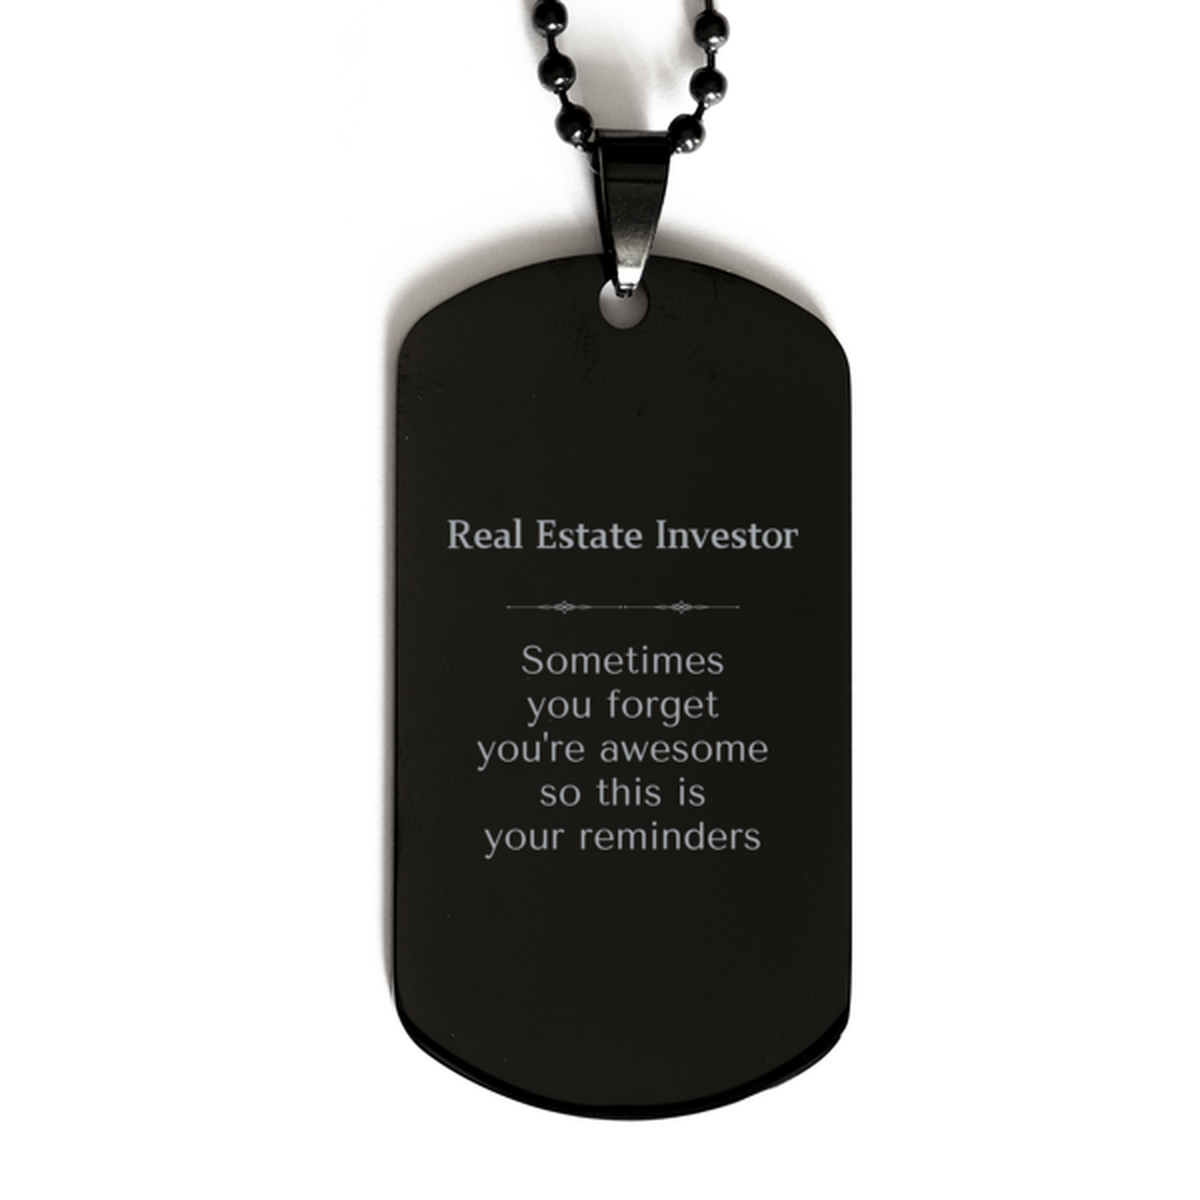 Sentimental Real Estate Investor Black Dog Tag, Real Estate Investor Sometimes you forget you're awesome so this is your reminders, Graduation Christmas Birthday Gifts for Real Estate Investor, Men, Women, Coworkers